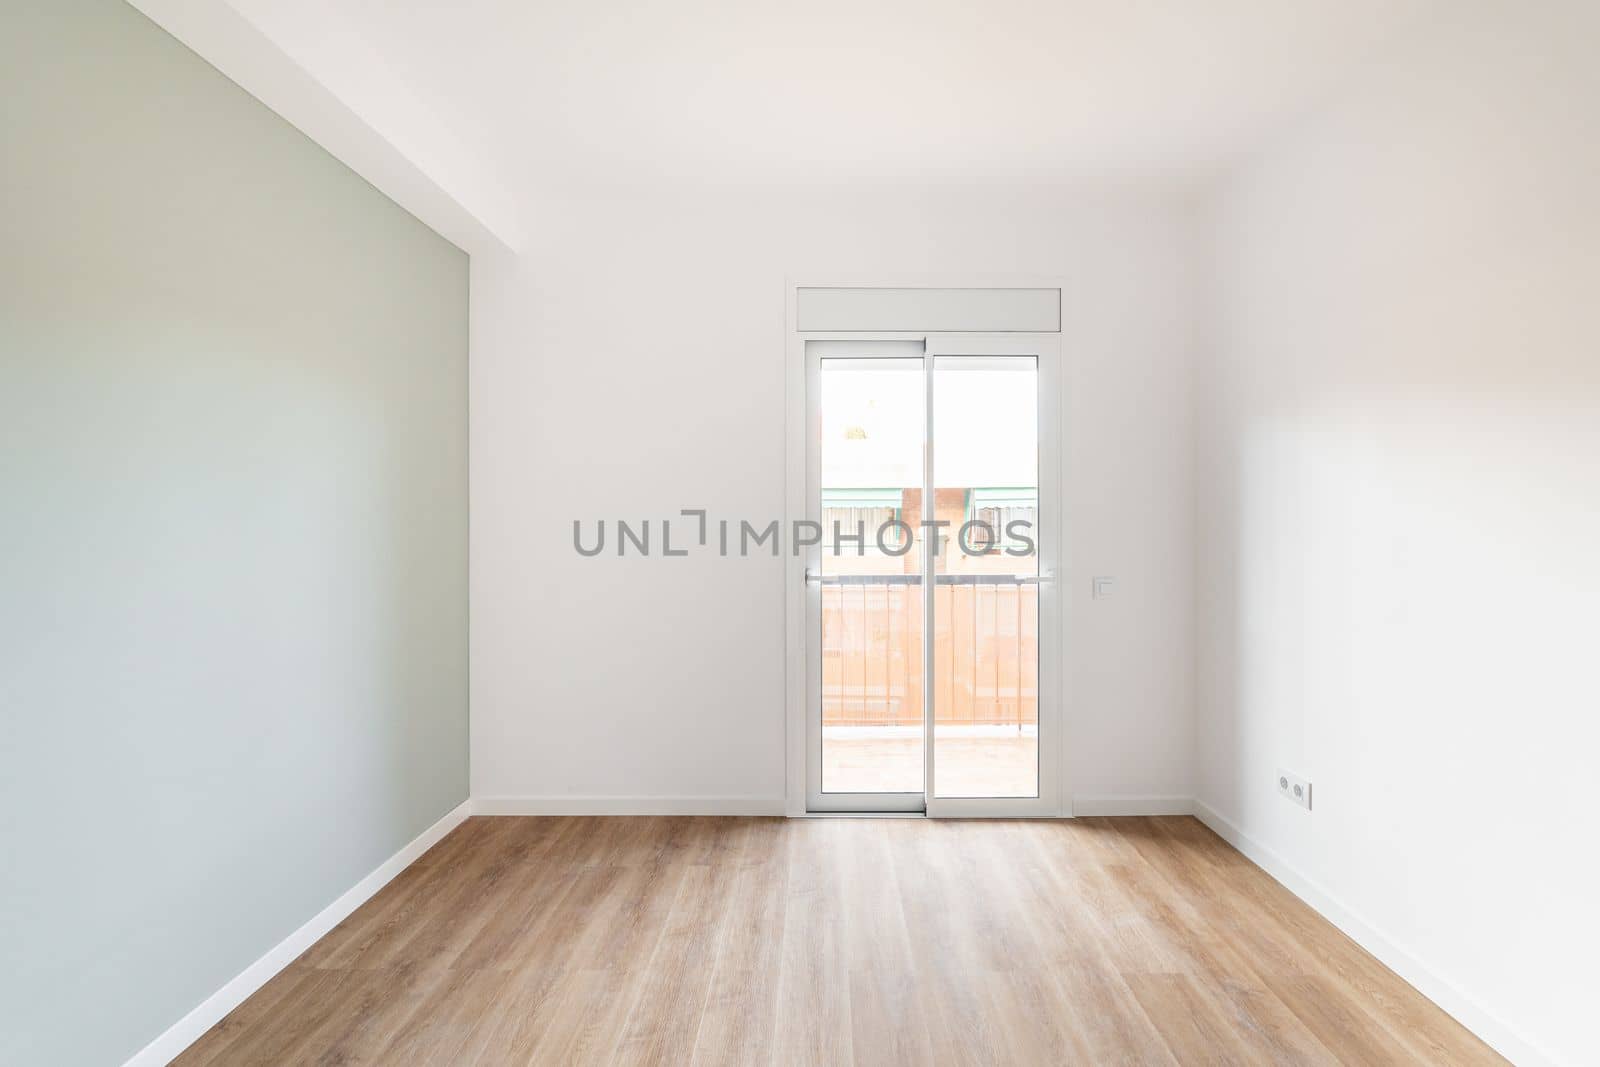 An empty bright room for living with access to balcony and view of neighboring house. Room has transparent glass door with access to balcony. Gray wall and wooden laminate floor create cozy feeling